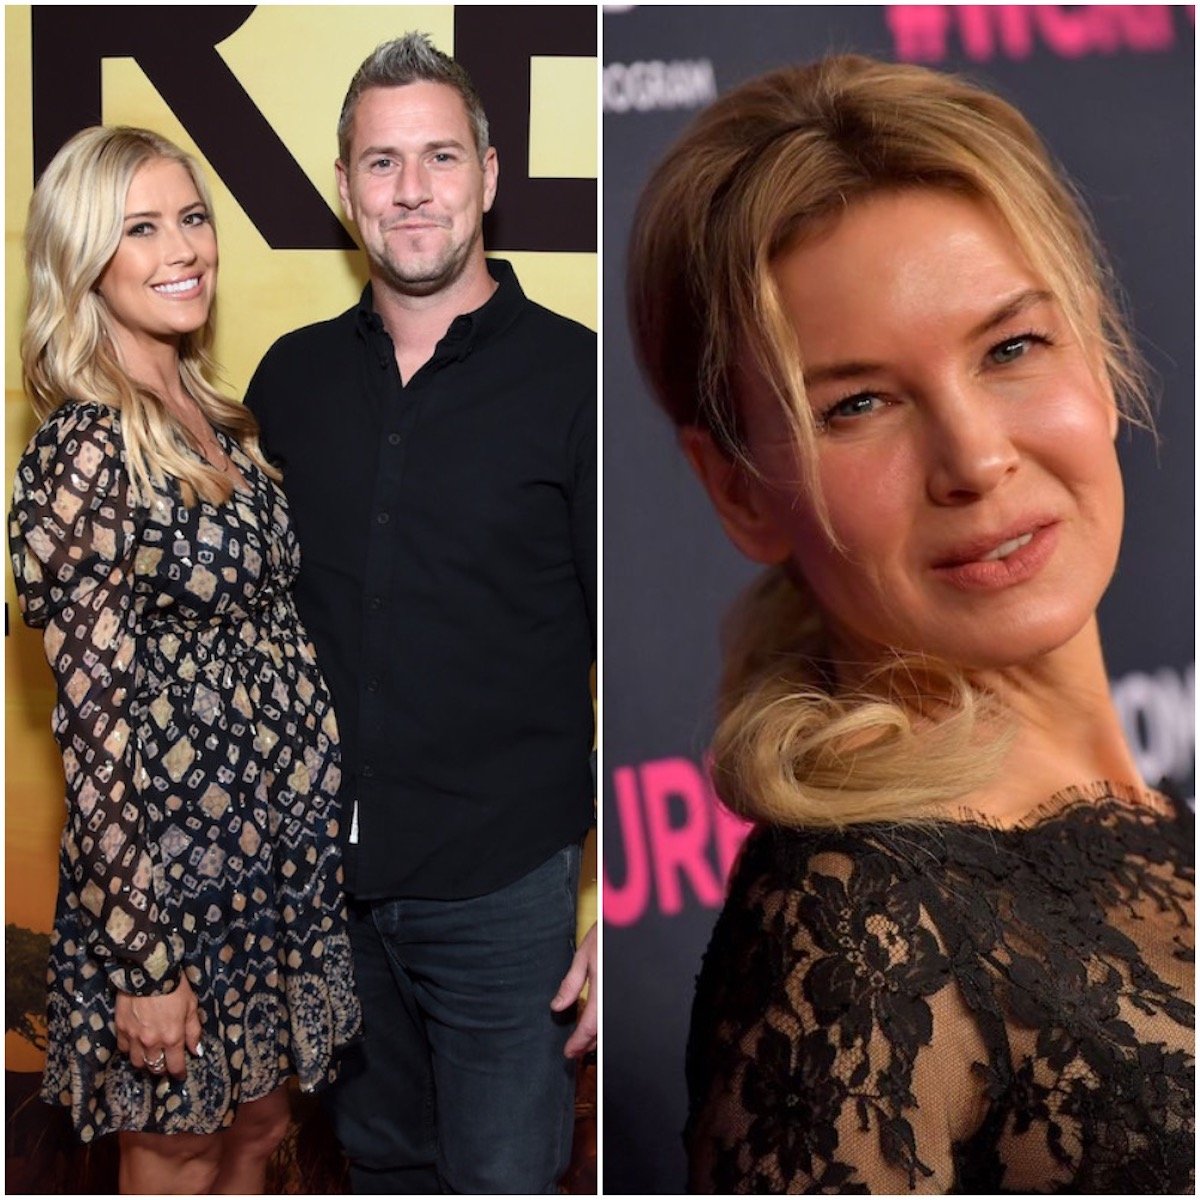 Christina Haack Vs Renee Zellweger Which Of Ant Anstead S Partners Has The Higher Net Worth